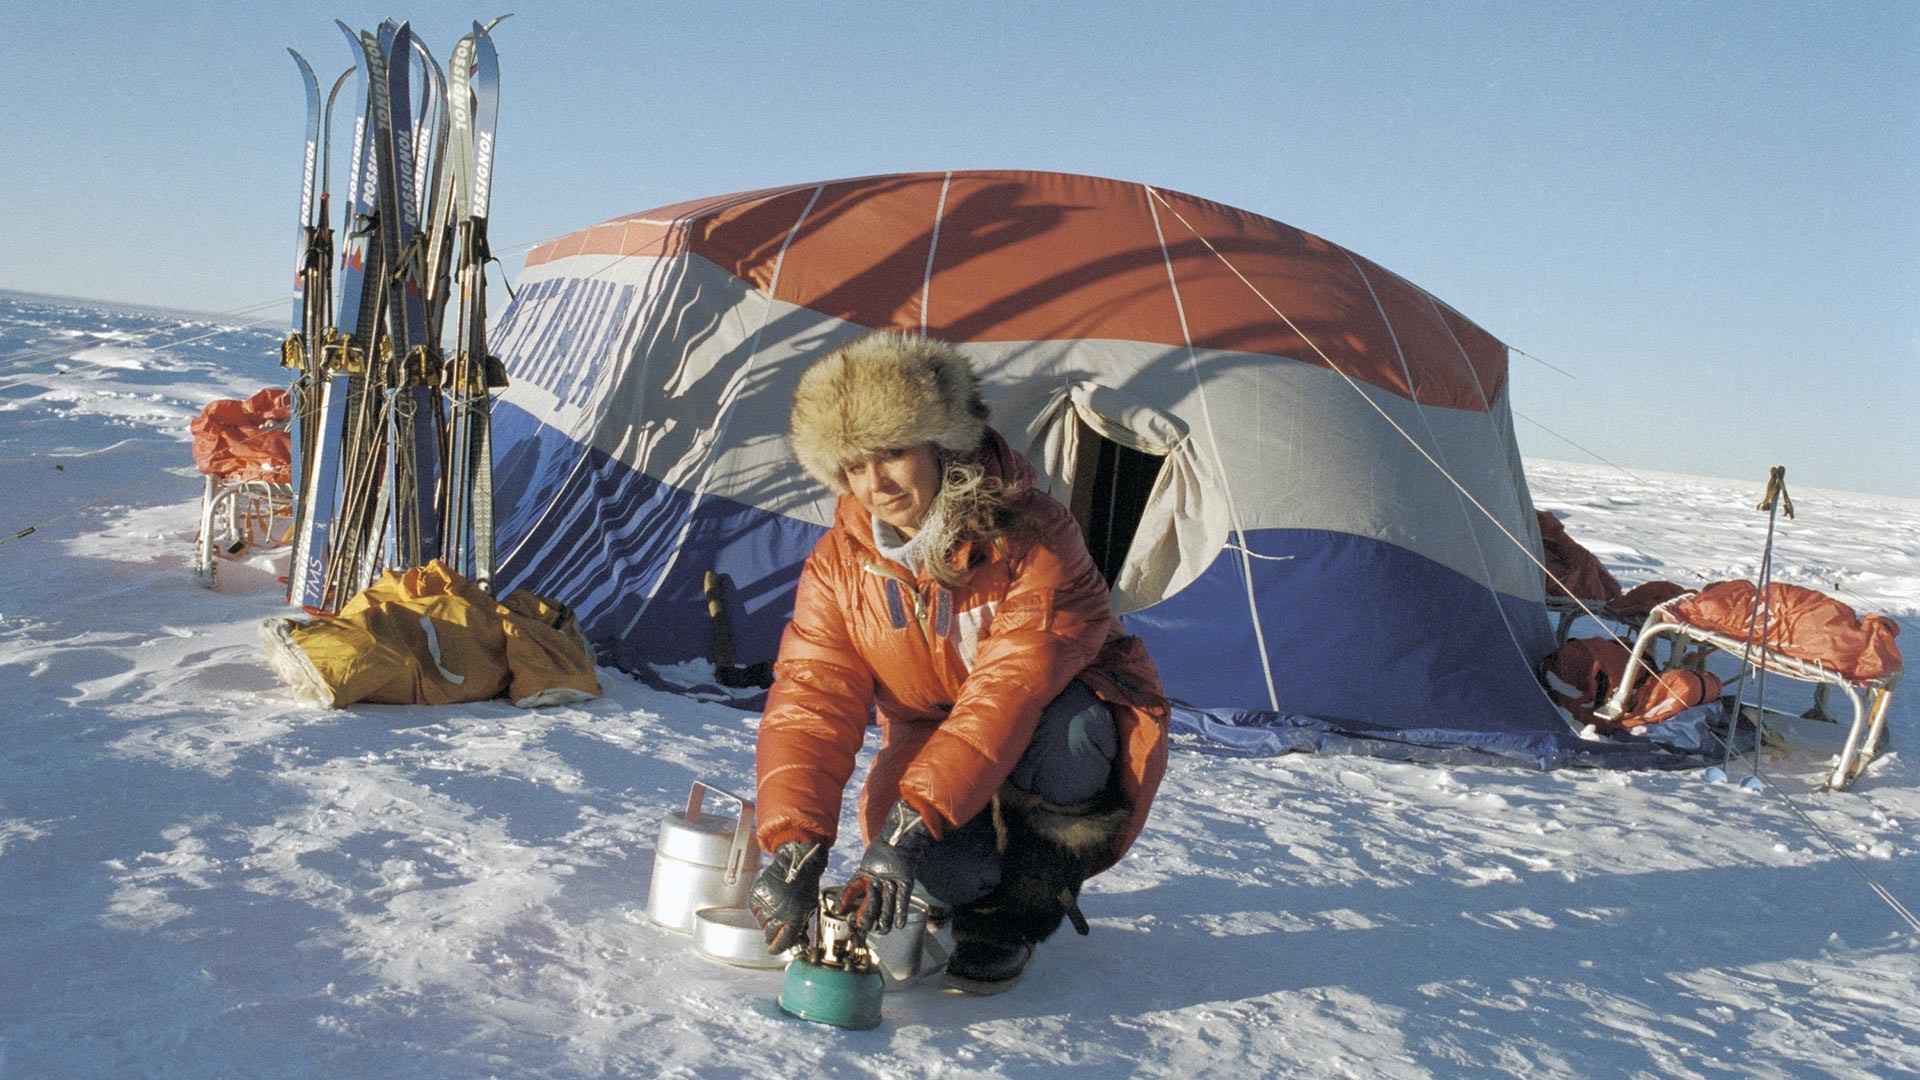 A member of Metelitsa during an expedition.